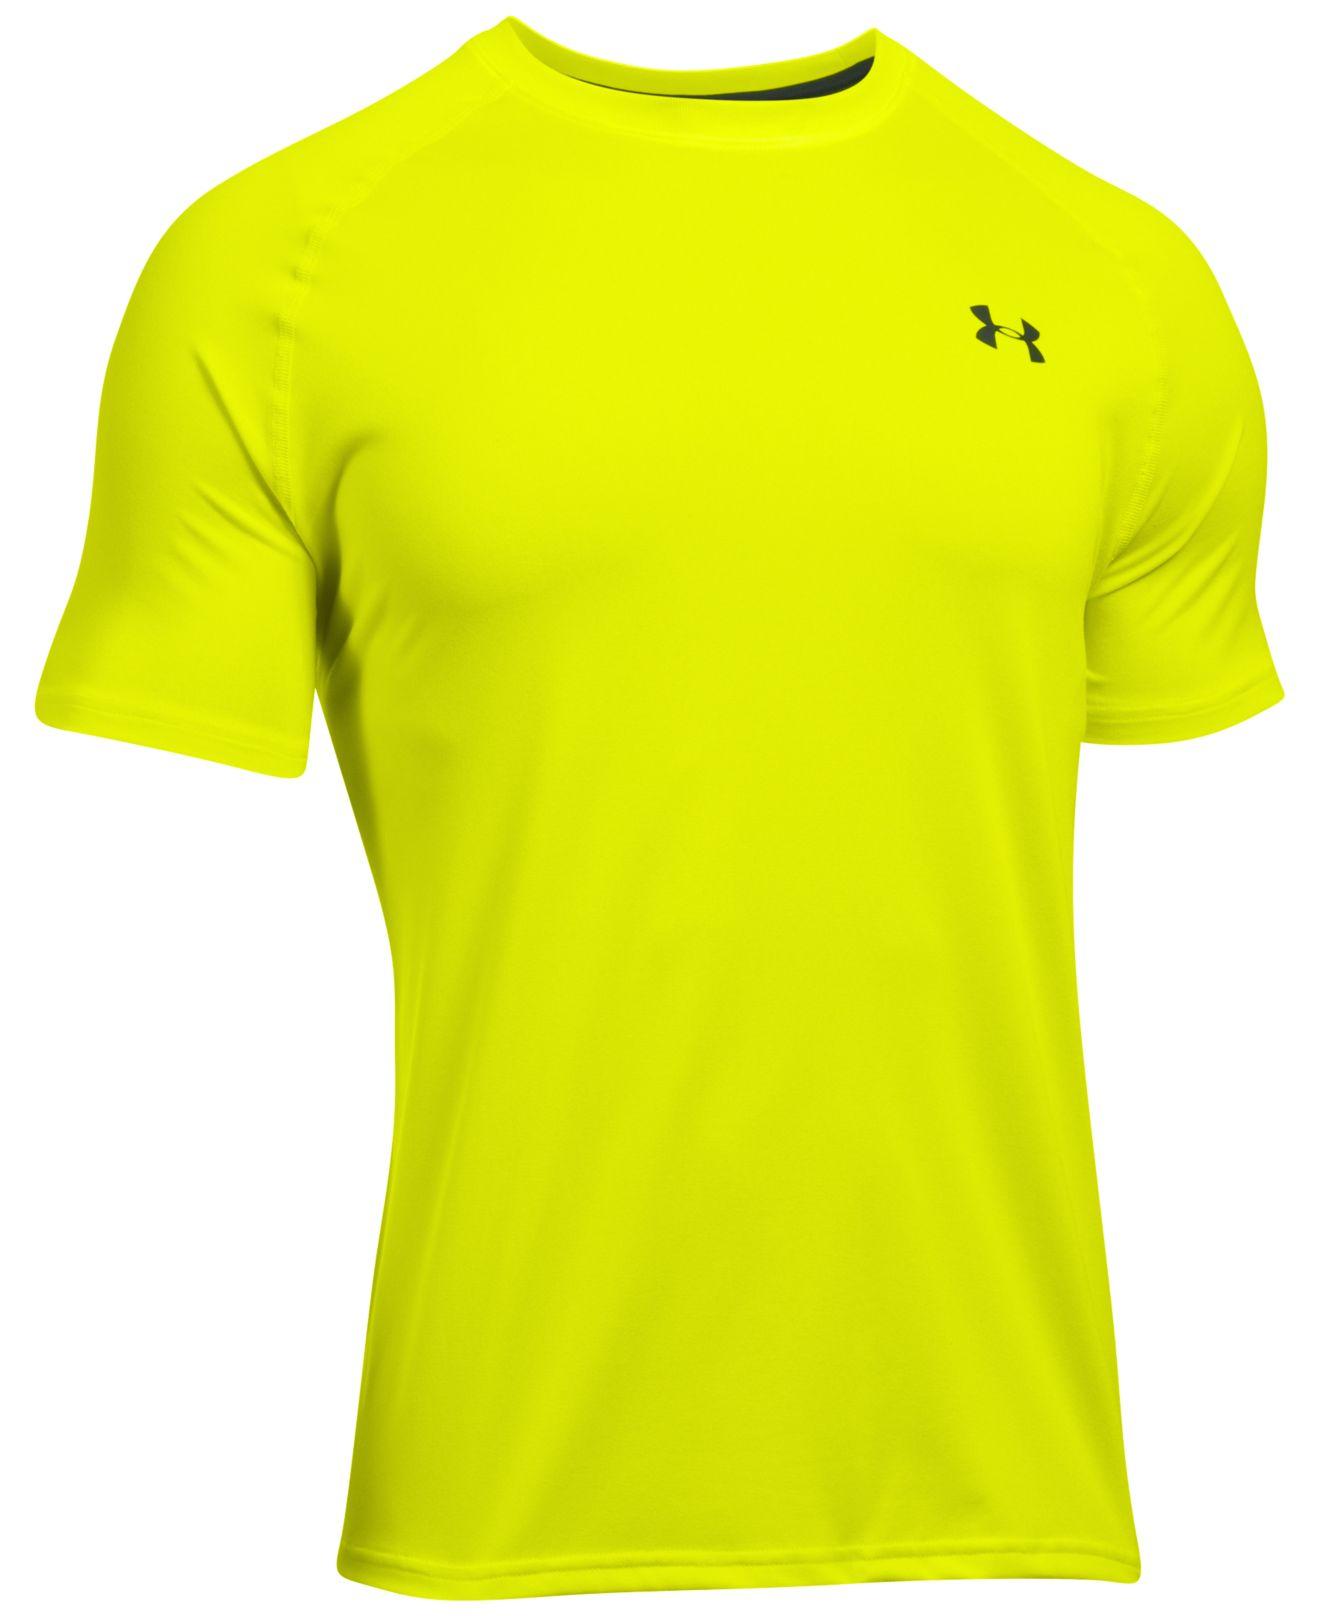 Lyst - Under Armour Tech Short Sleeve T-shirt in Yellow for Men